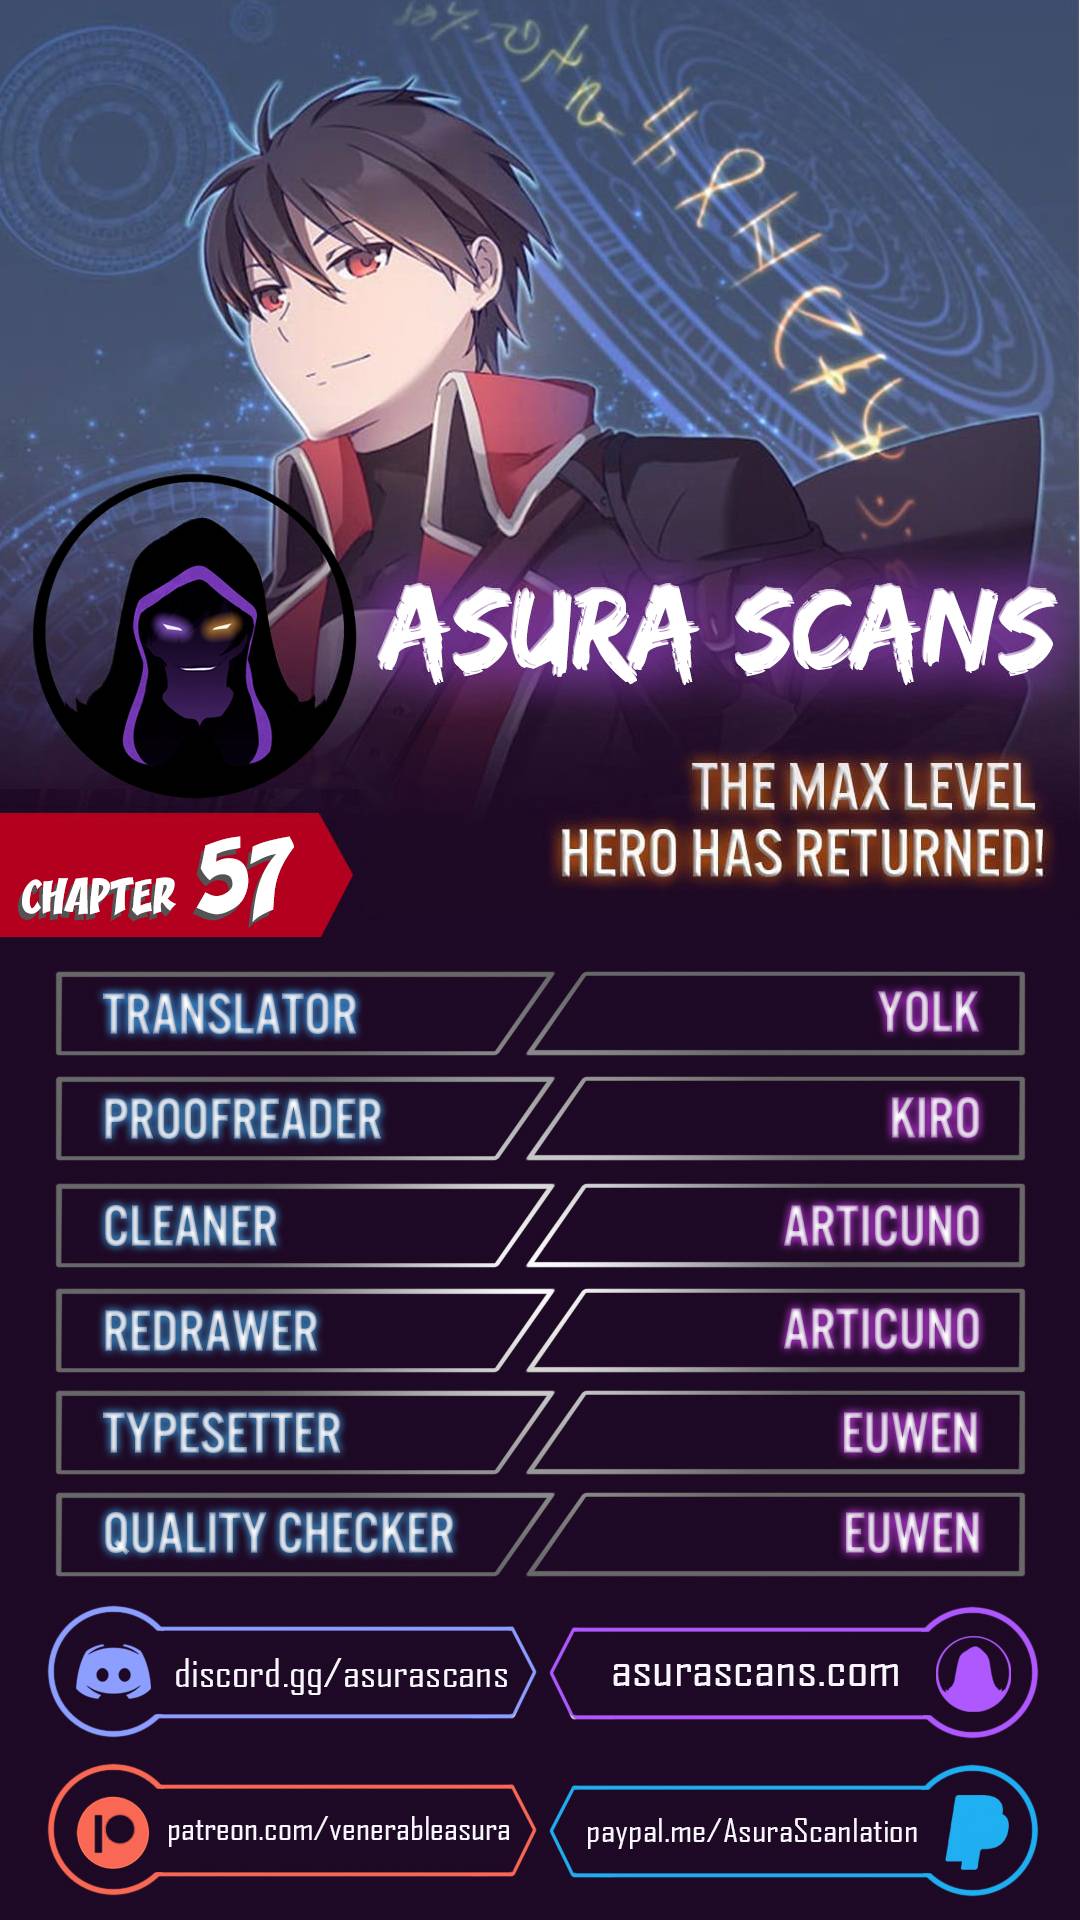 The MAX leveled hero will return! Chapter 57